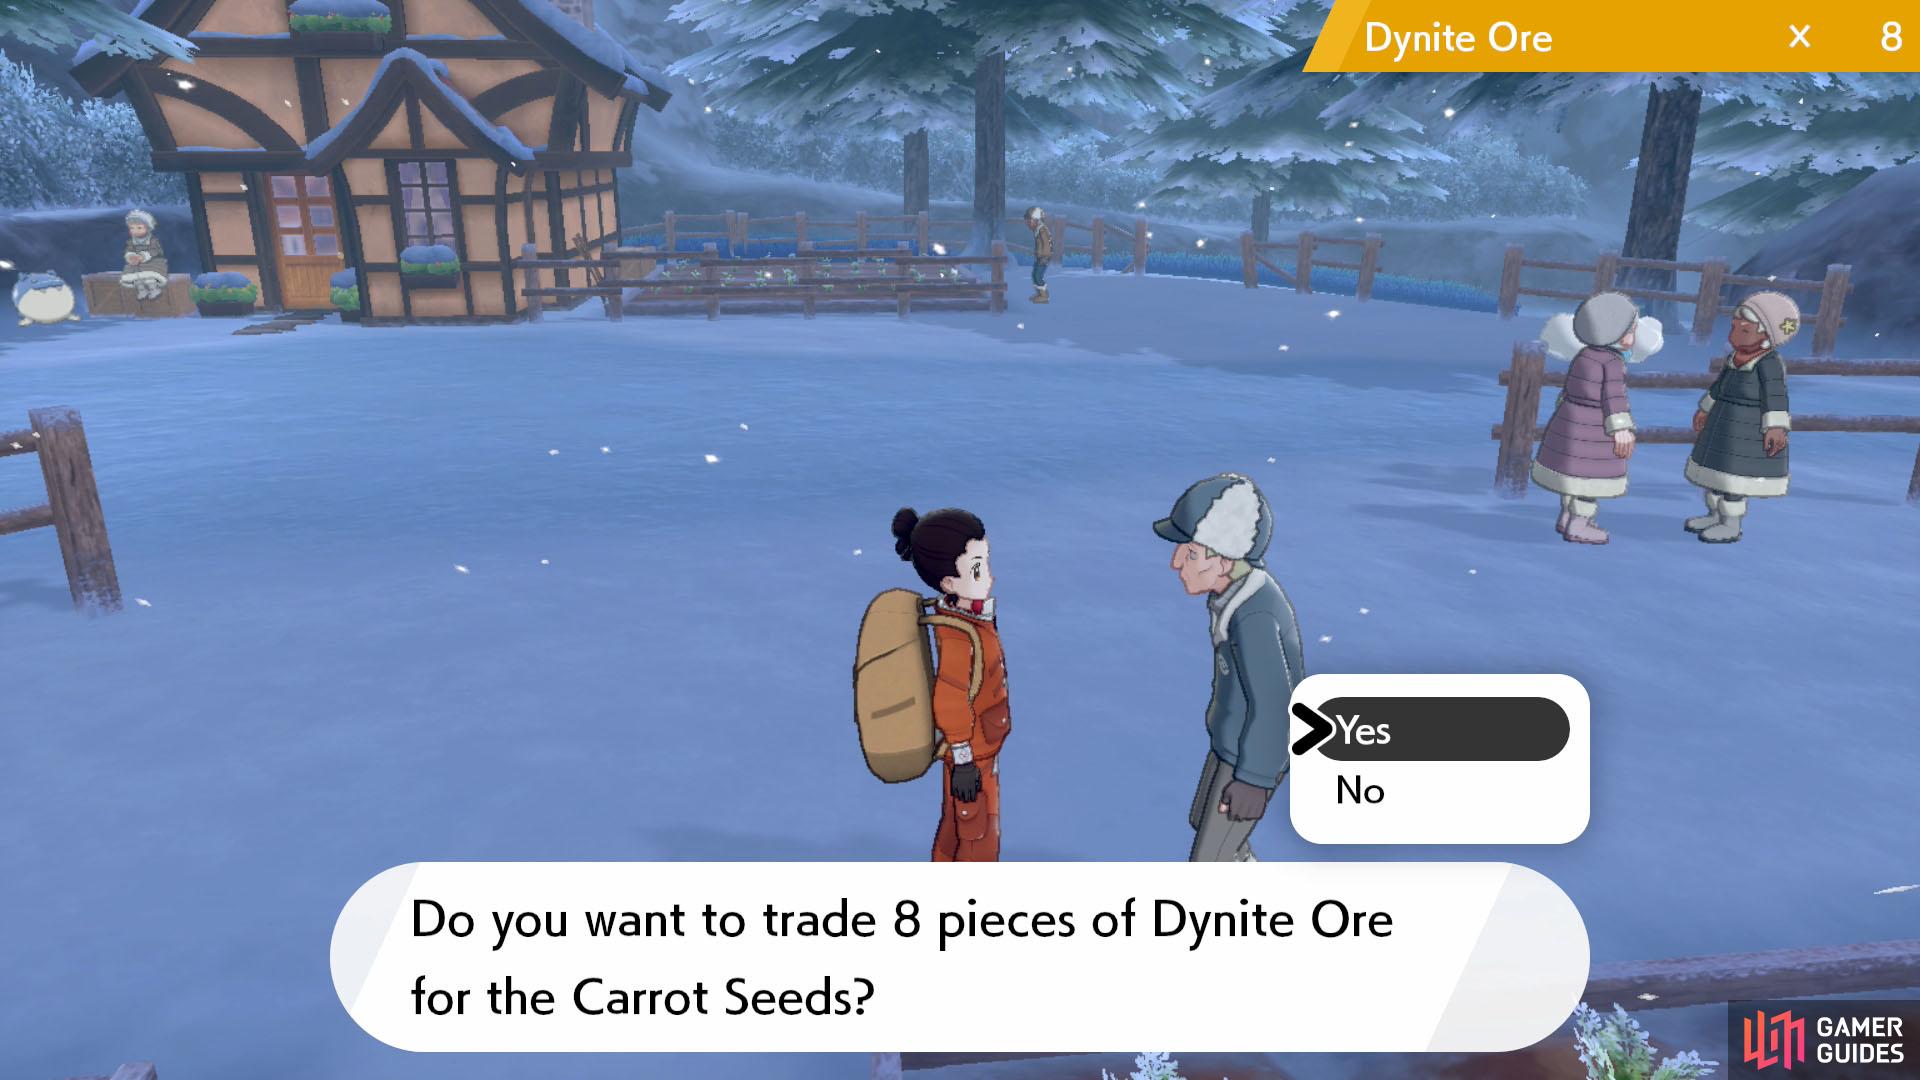 If you thought this guy would be generous enough to give you the seeds for free, think again.